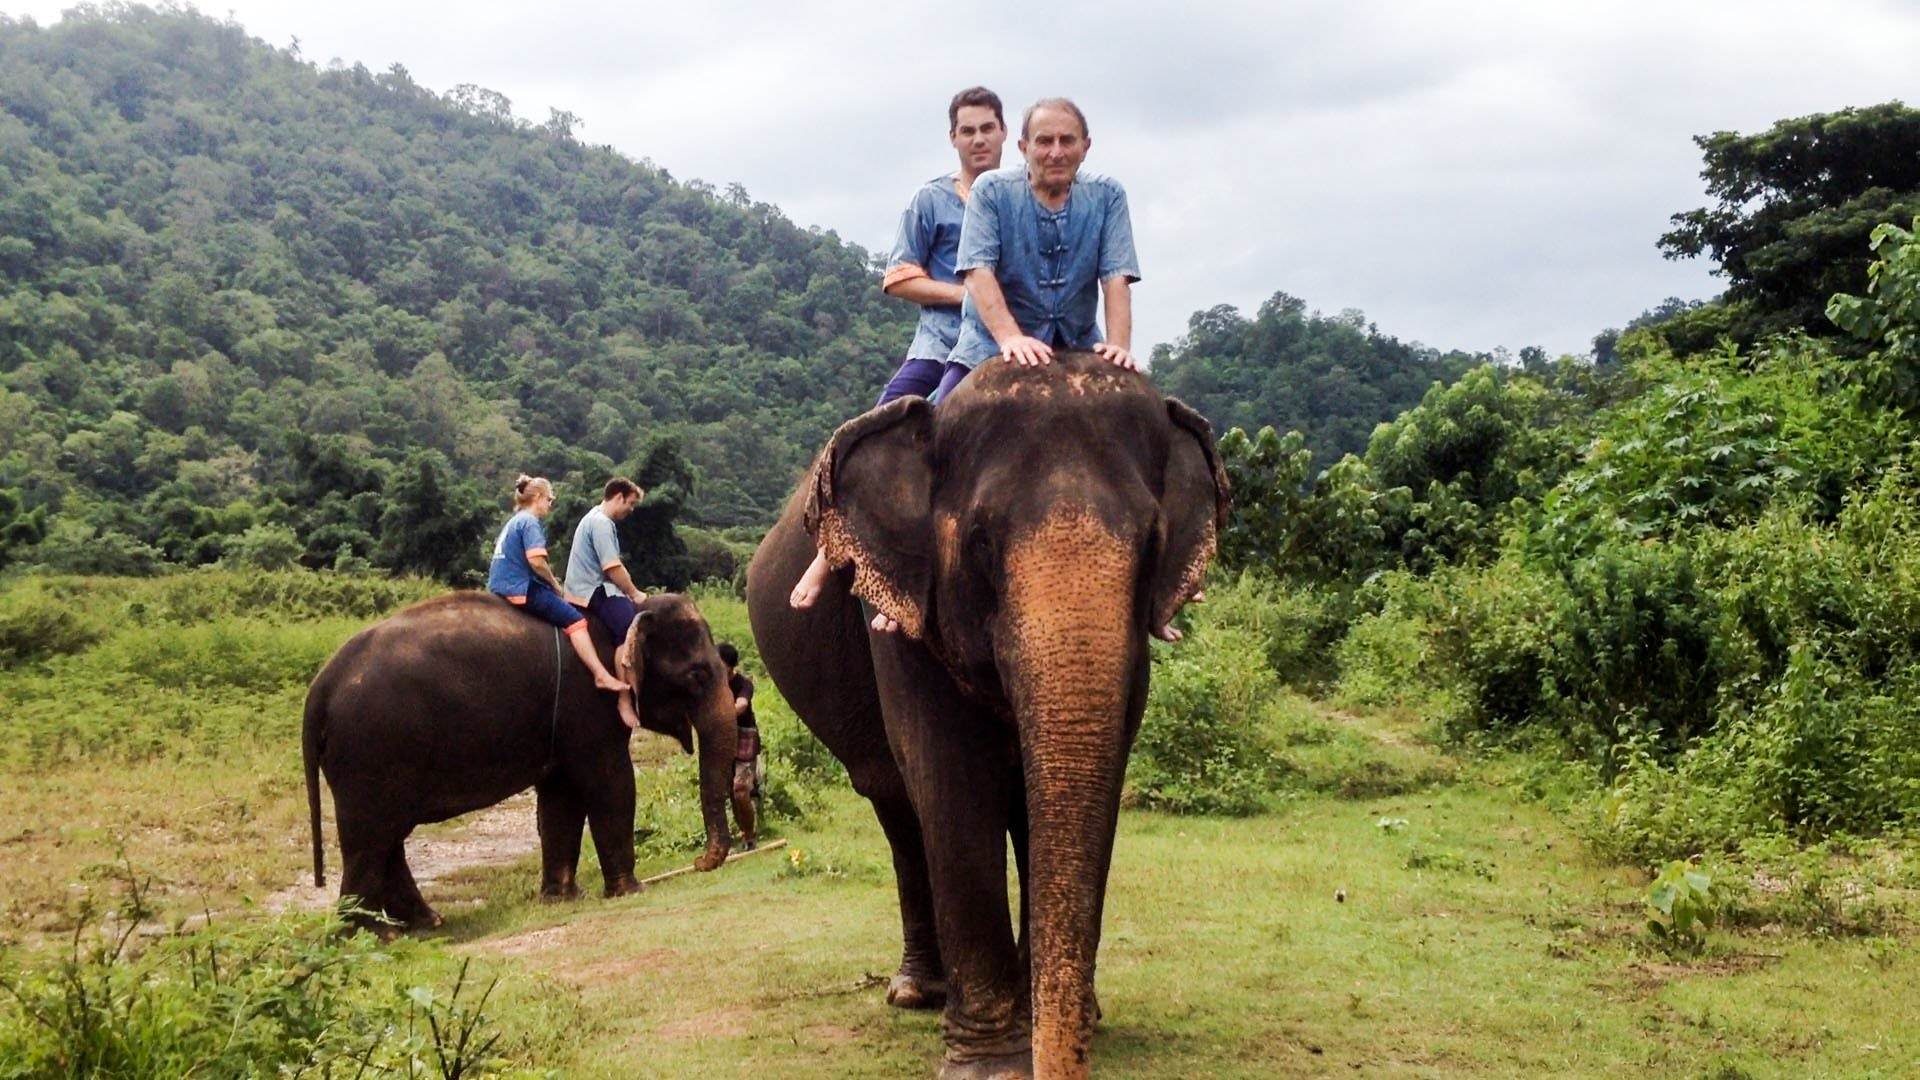 Elephant riding - Top 5 Adventurous Activities in Chiang Mai	